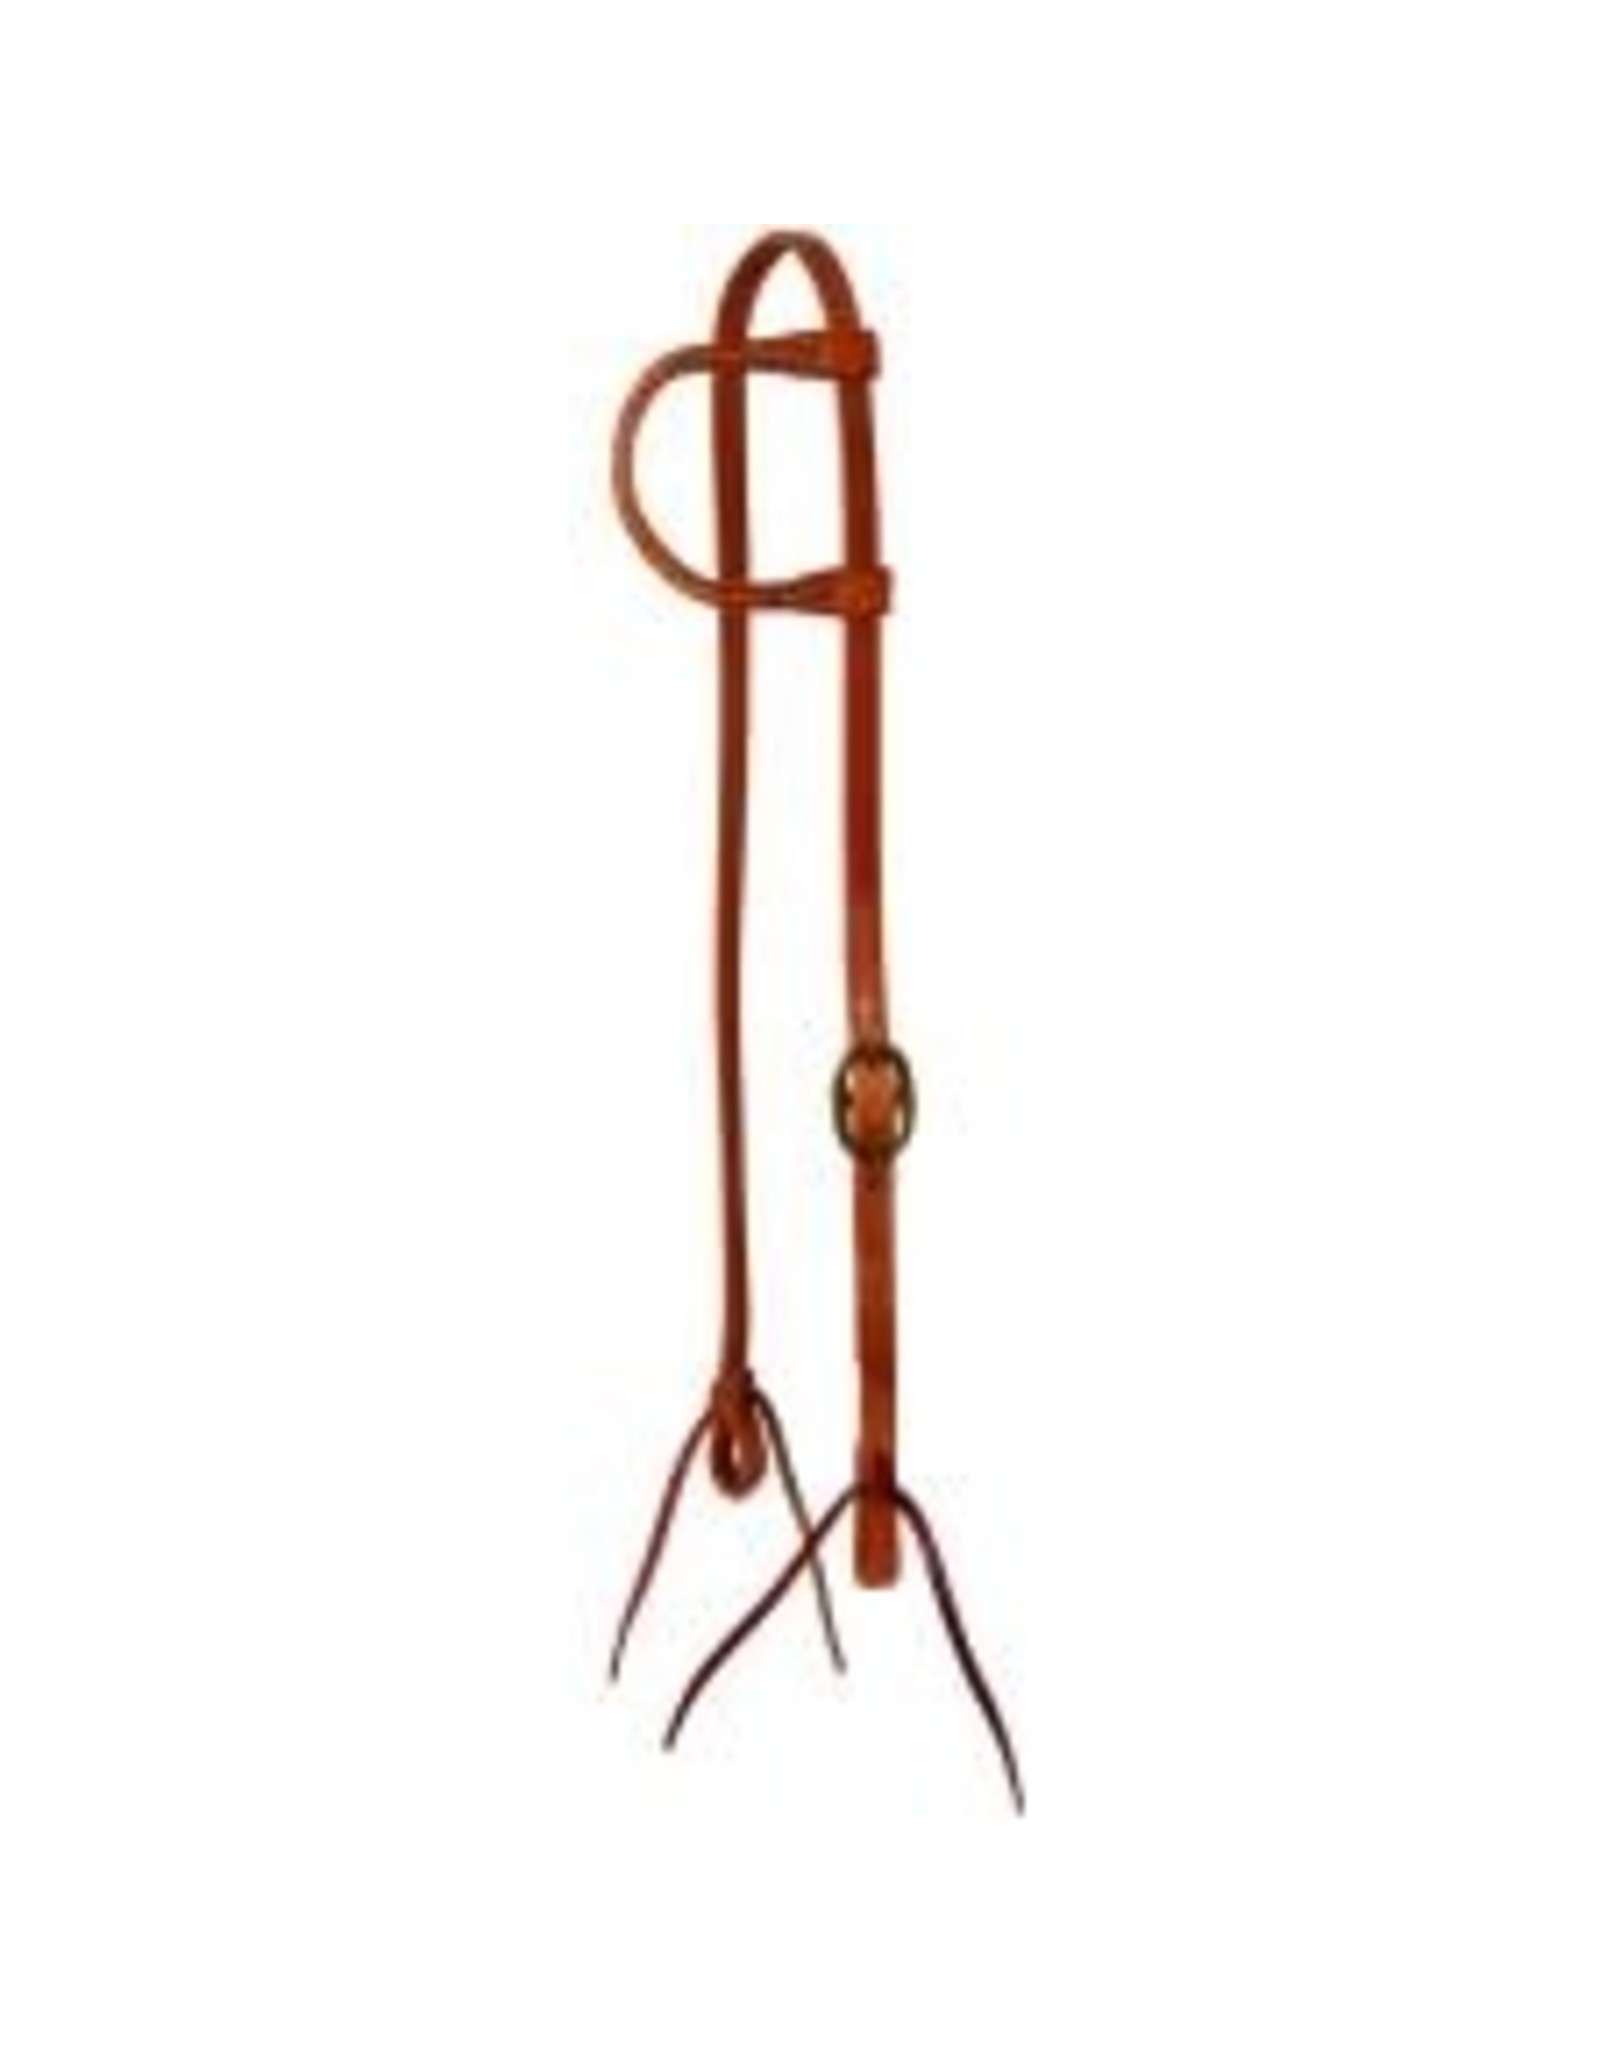 Western Rawhide Signature One Ear Headstall with Ties, 5/8" - Chestnut - 202011-54